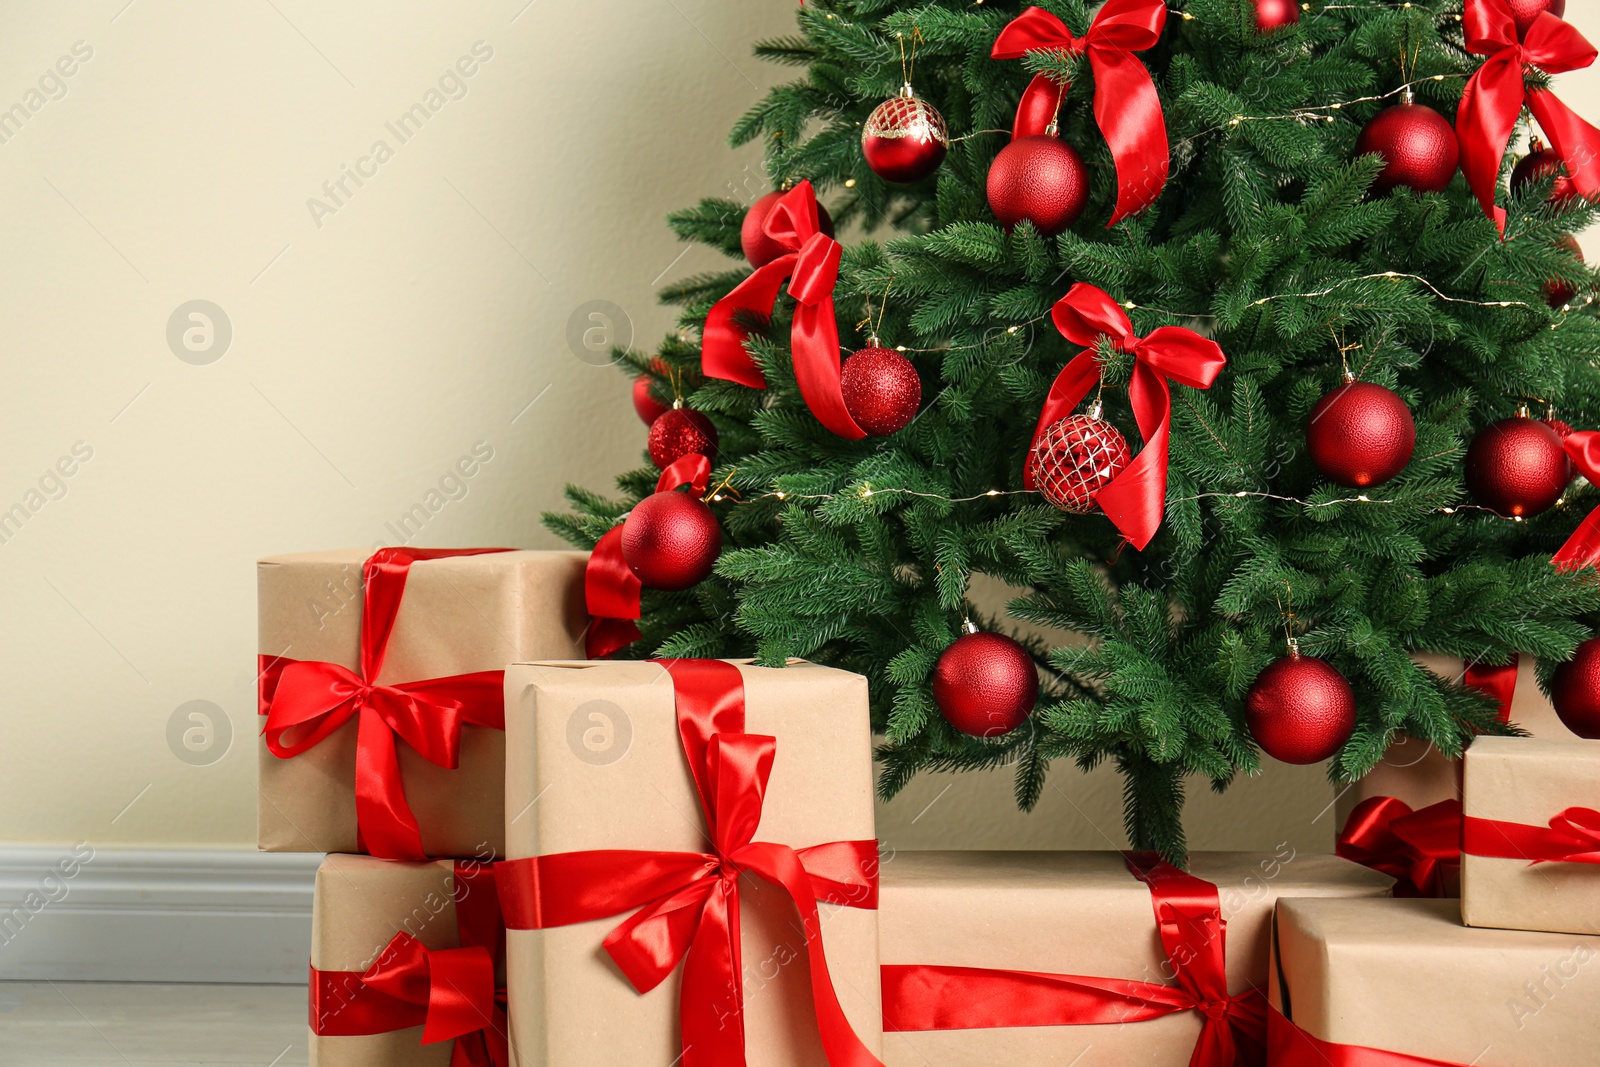 Photo of Decorated Christmas tree and gift boxes near beige wall